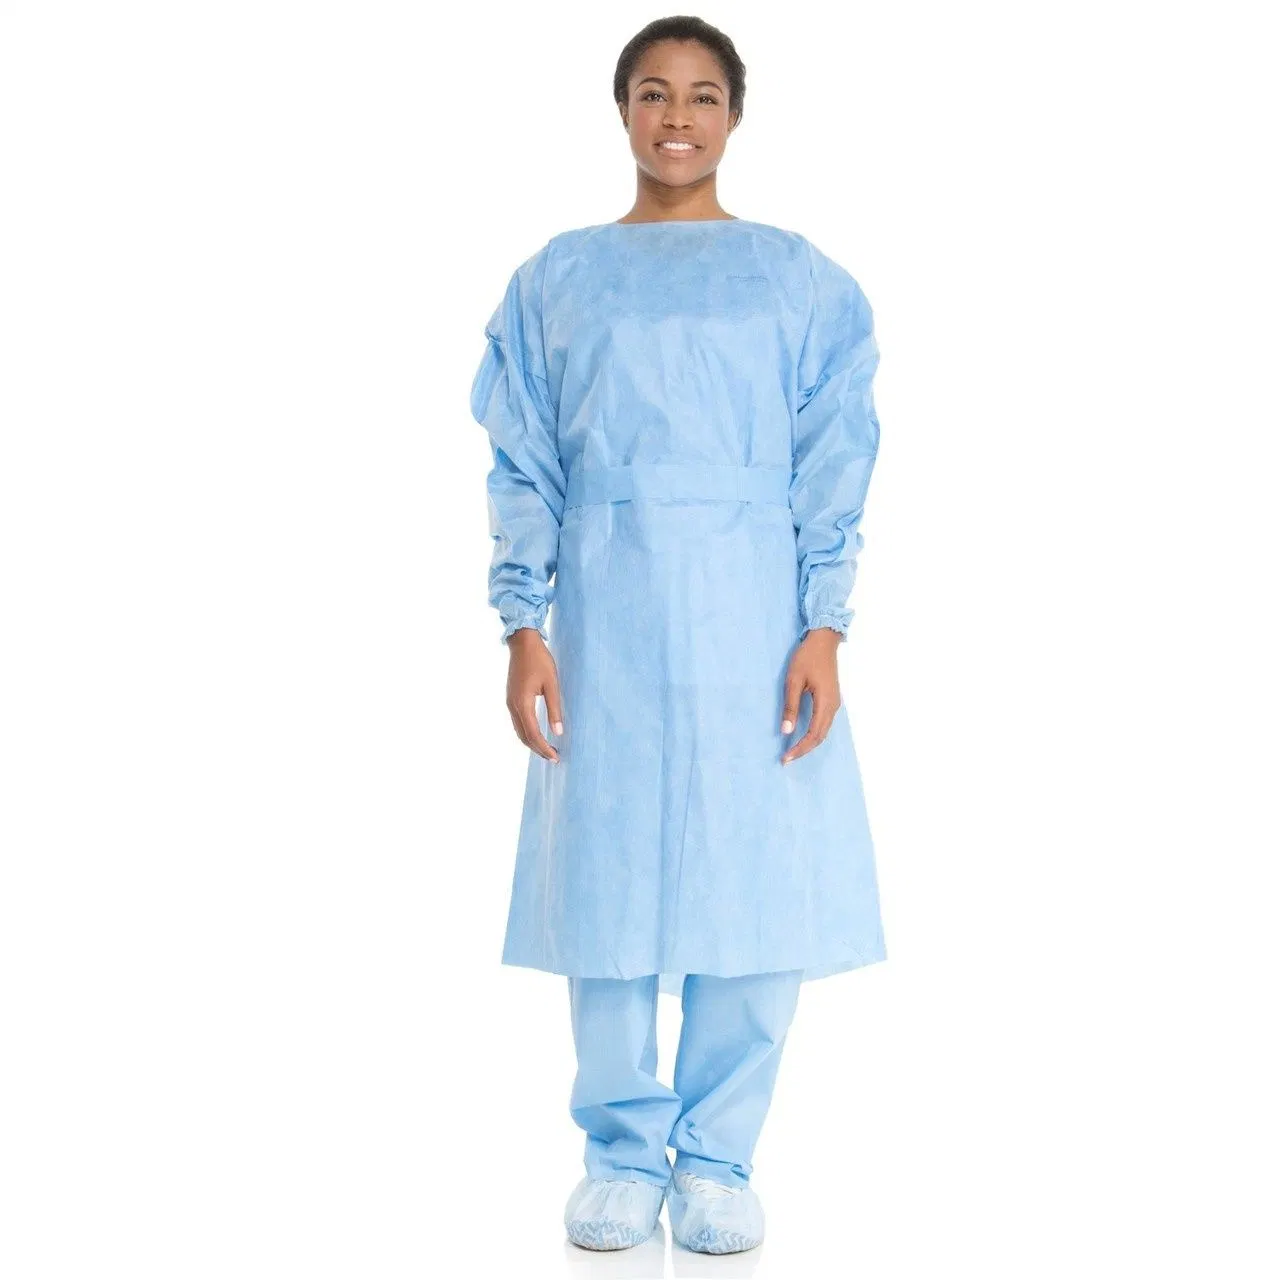 Surgery Use Protective SMMS Surgical Gown with Knitted Cuff Reinforce En13795